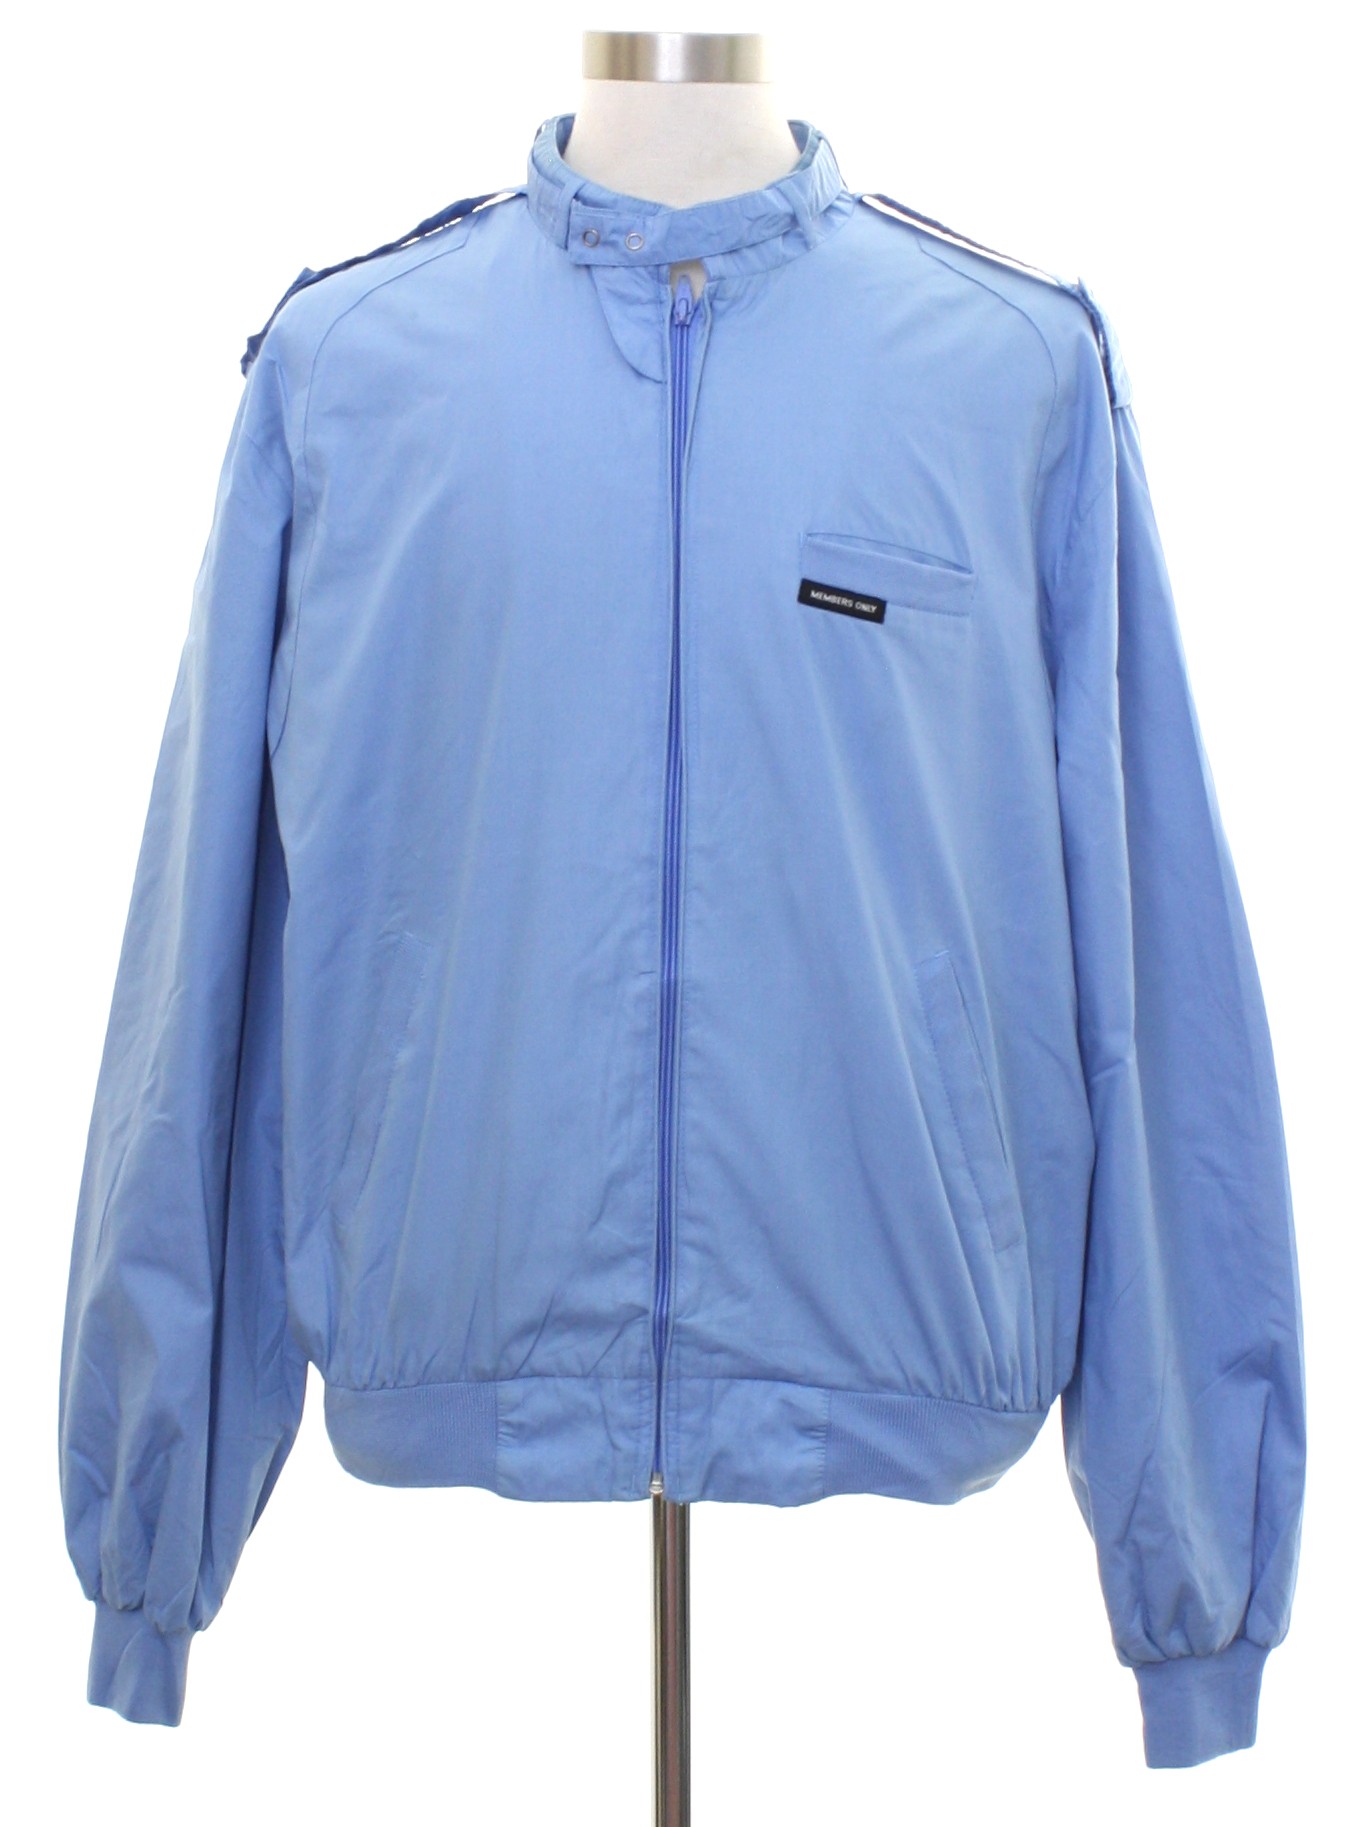 Members Only Jackets 80s | stickhealthcare.co.uk